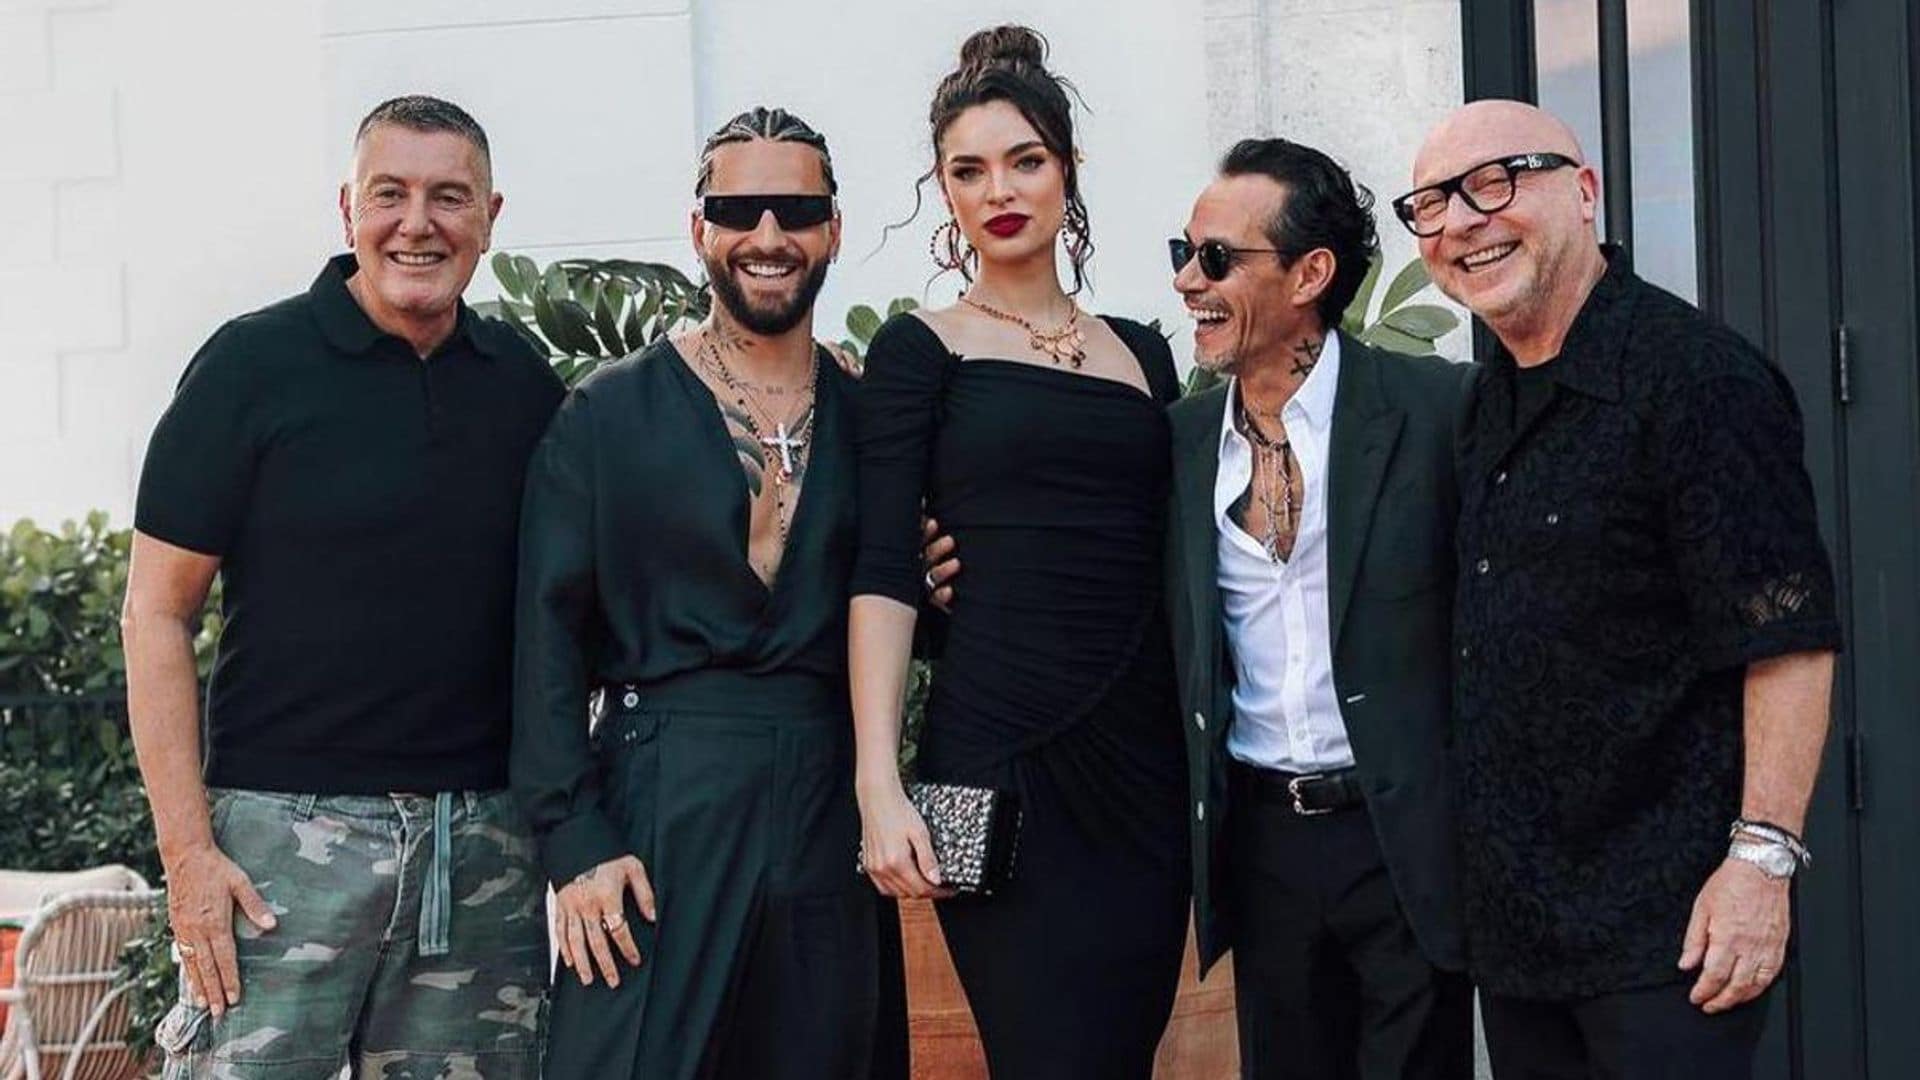 Marc Anthony, Nadia Ferreira, and Maluma sit front row at Dolce & Gabbana’s latest fashion show in Miami